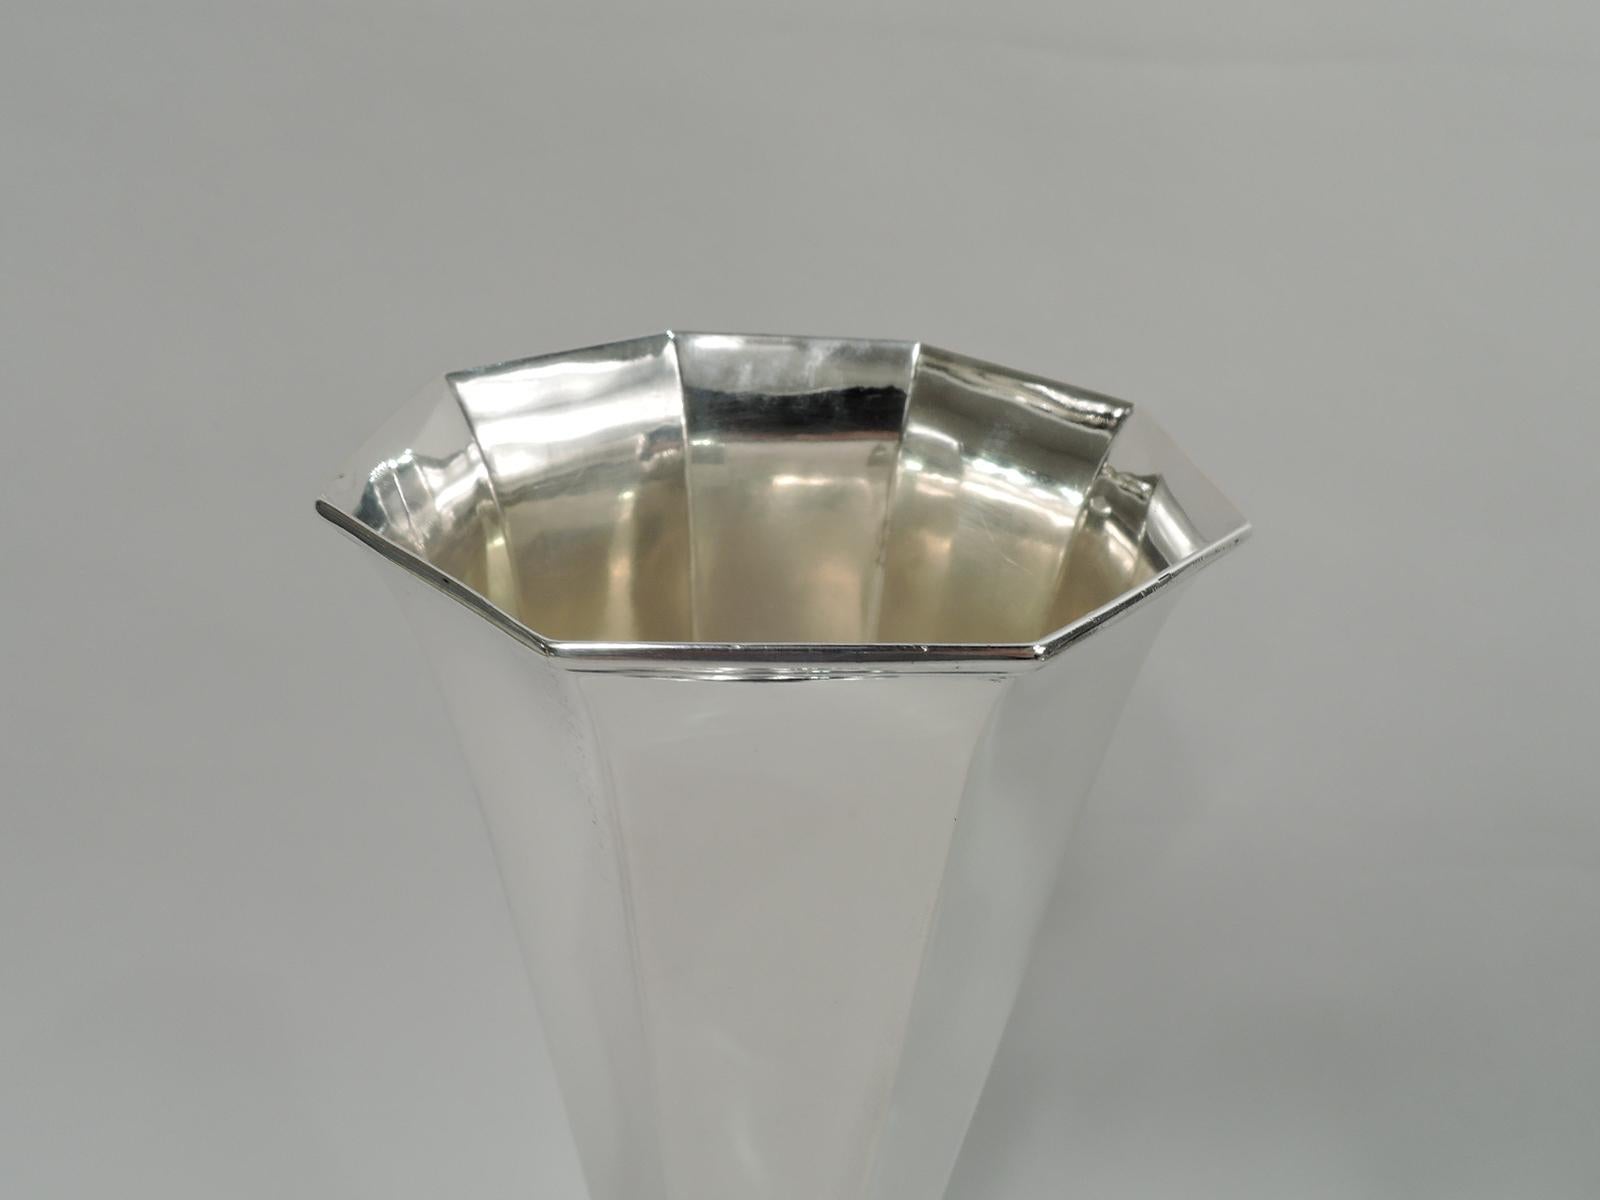 Art Deco sterling silver trumpet vase. Made by Tiffany & Co. in New York, ca 1914. Straight, tapering and faceted sides. Foot raised and same. Fully marked including maker’s stamp, pattern no. 18700 (first produced in 1914), and director’s letter m.